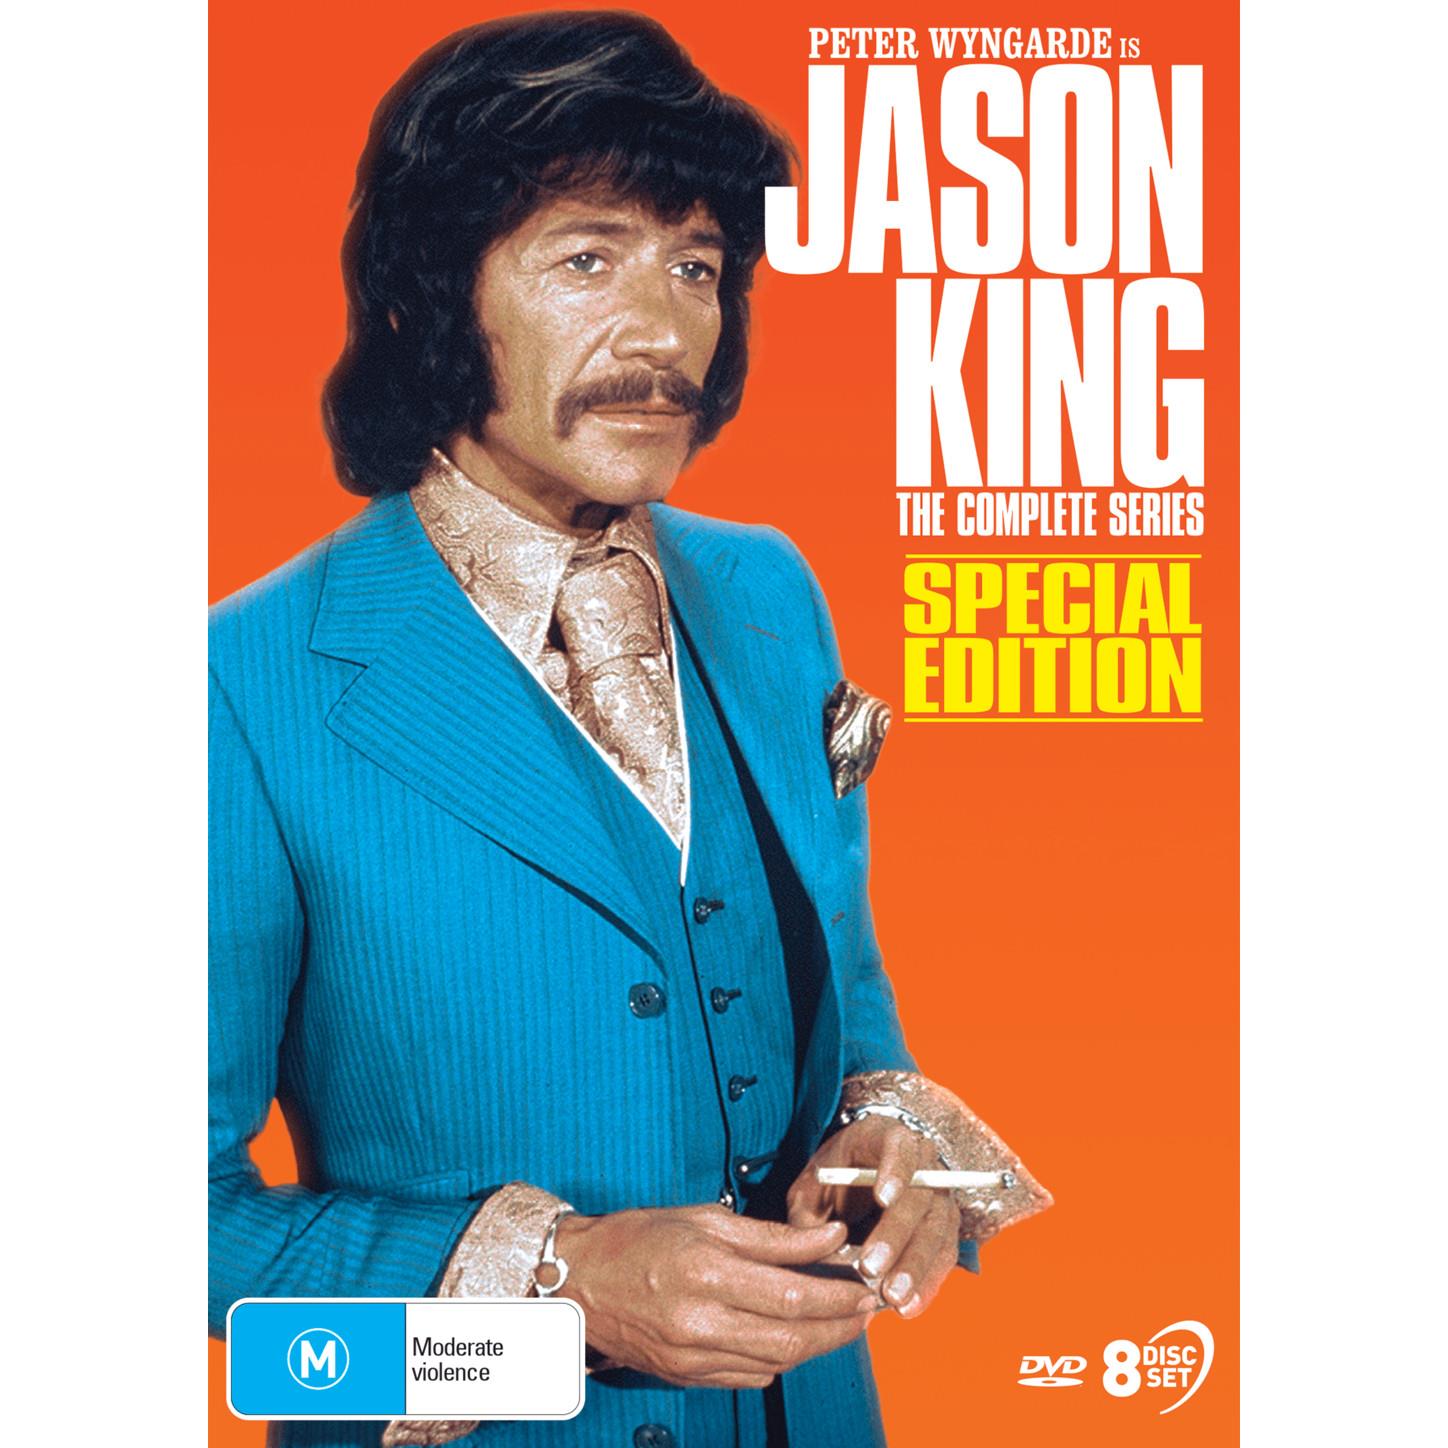 jason king - complete series (special edition)